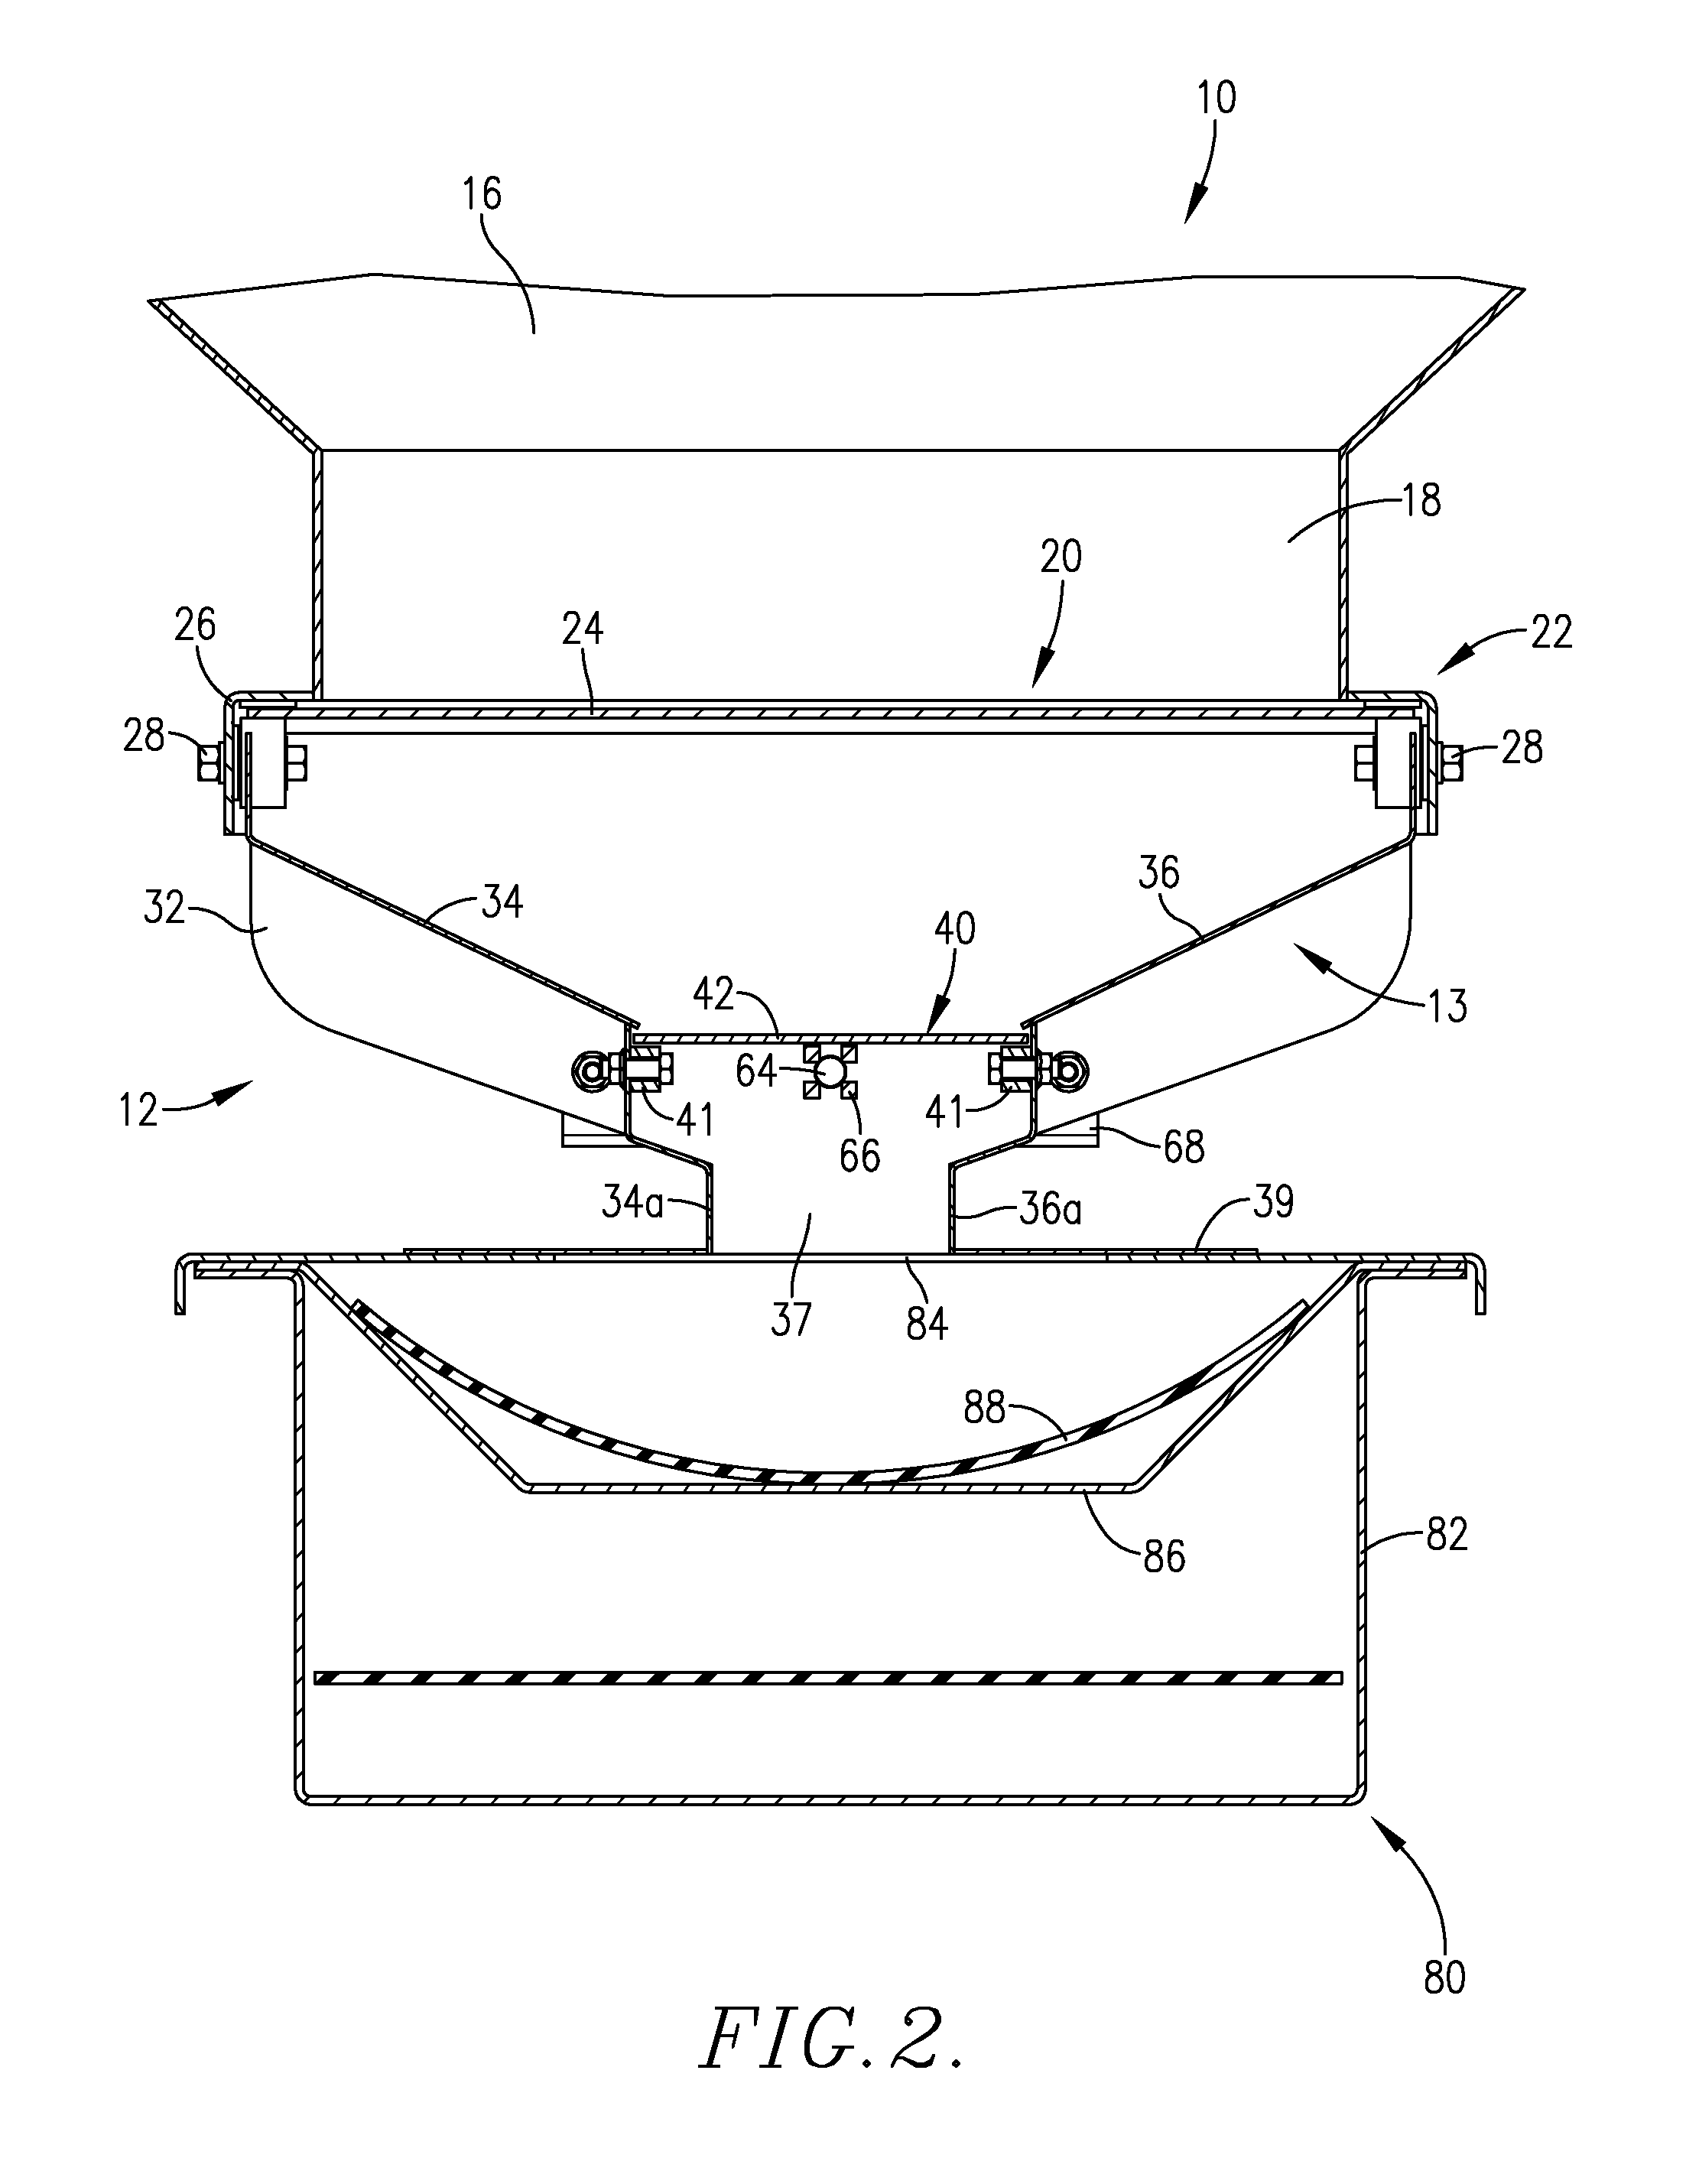 Seed metering gate assembly